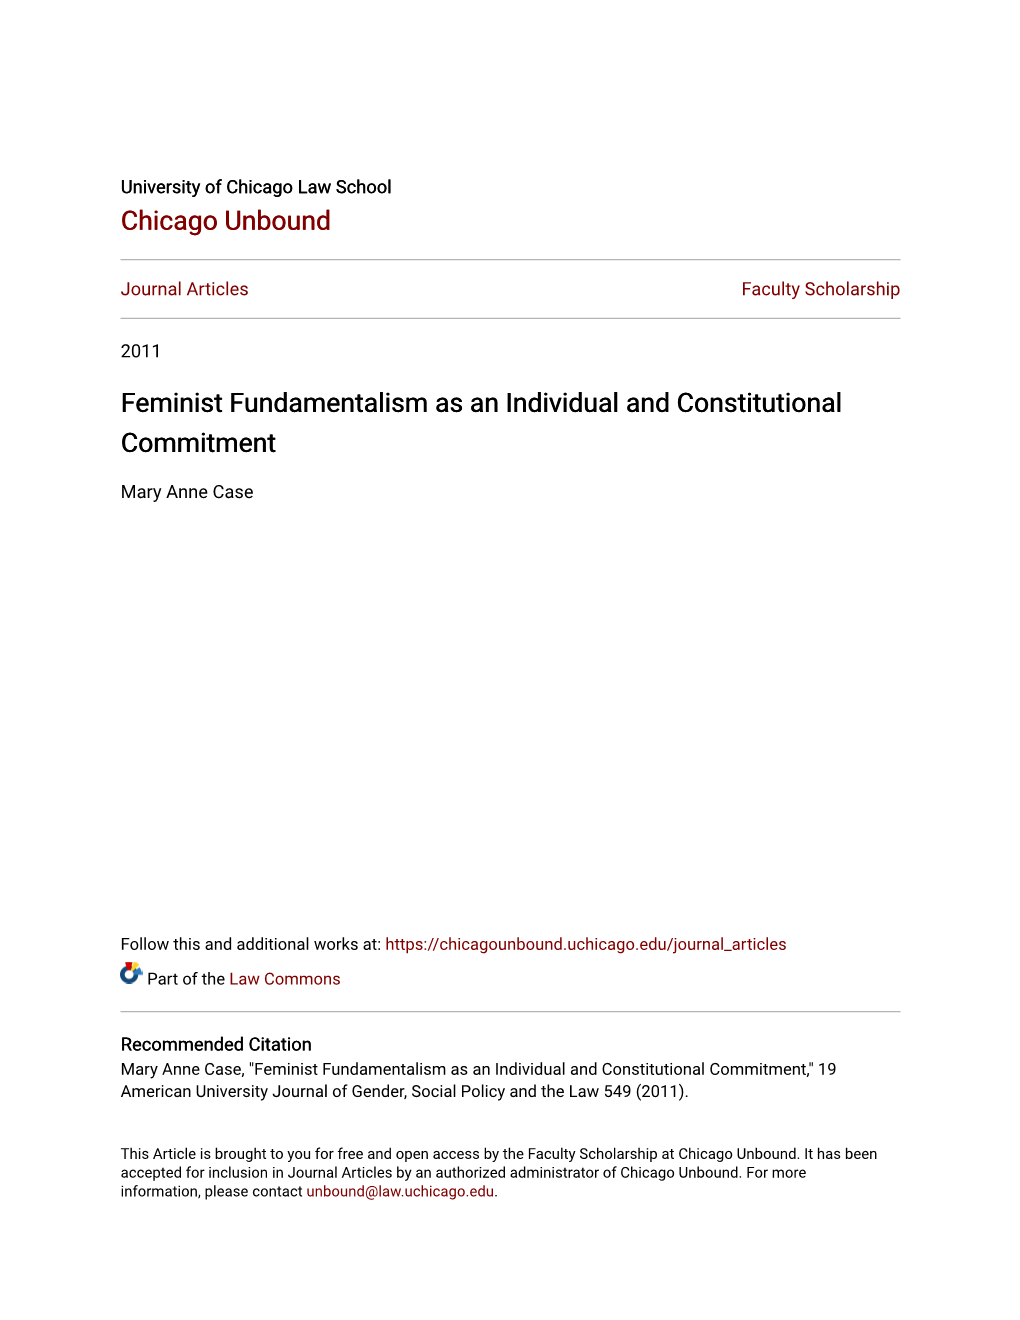 Feminist Fundamentalism As an Individual and Constitutional Commitment